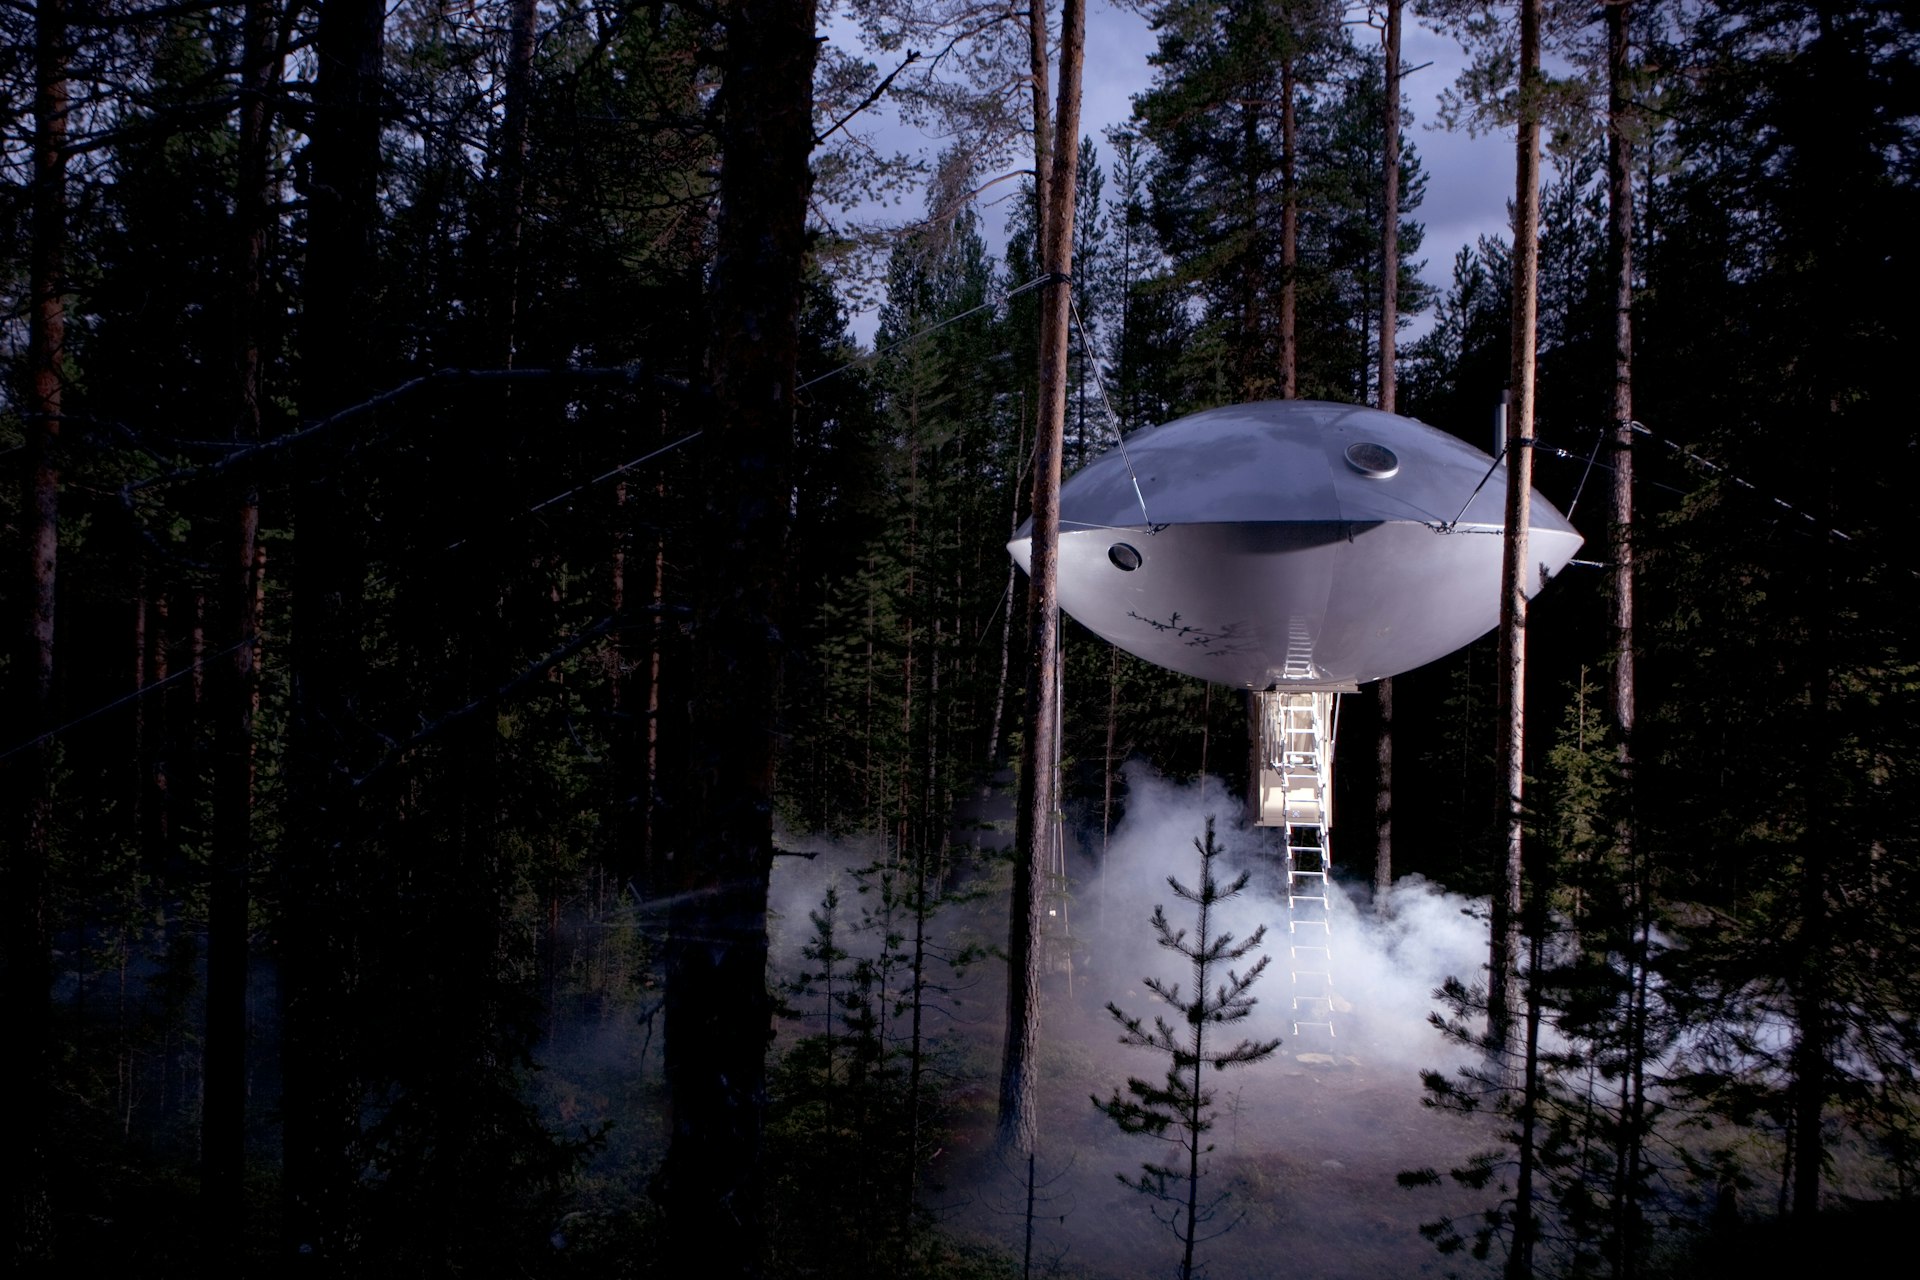 A silver dish-like unit is suspended from some trees in woodland. A ladder stretches down to the ground